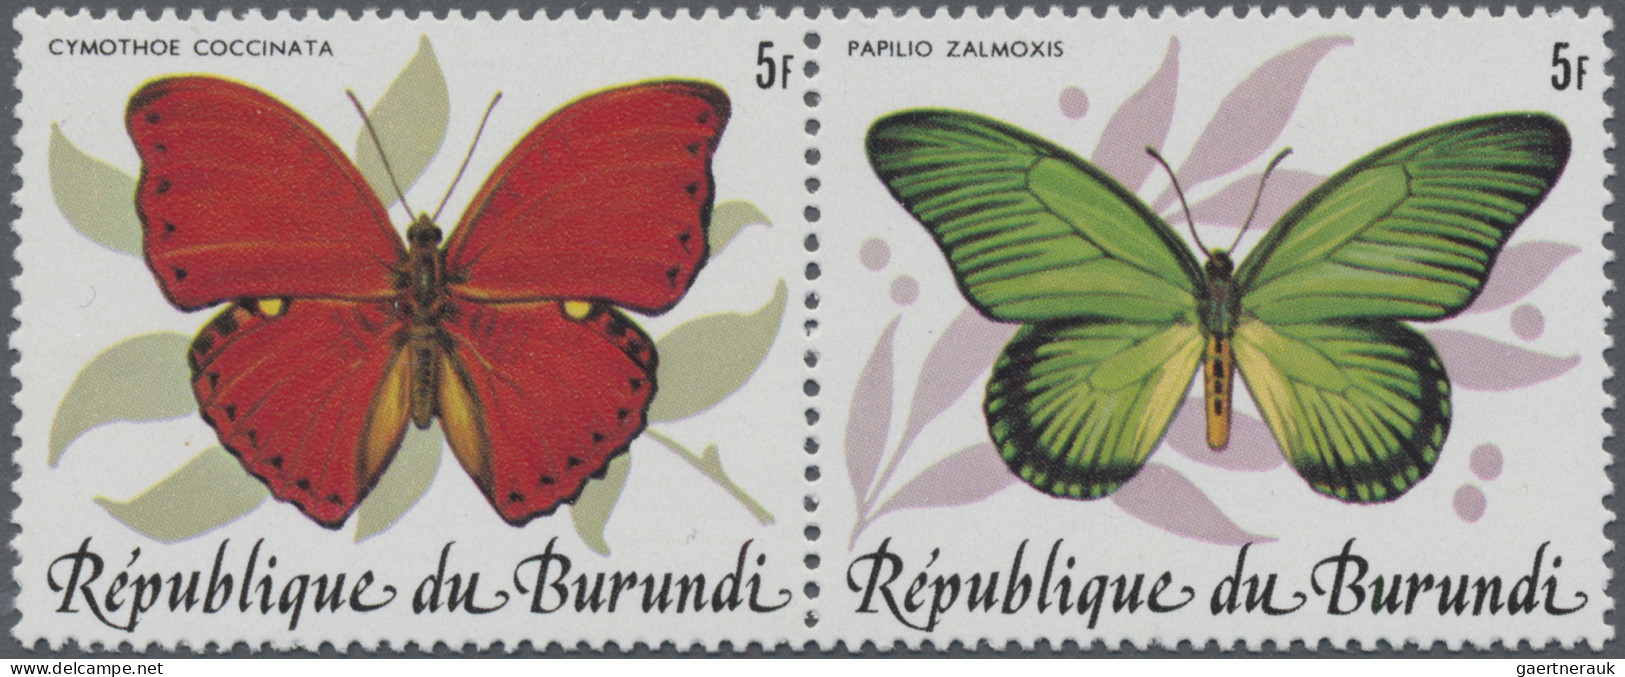 Burundi: 1984: Butterflies, Se-tenant 5 pairs of perforated (COB 385 €) and impe